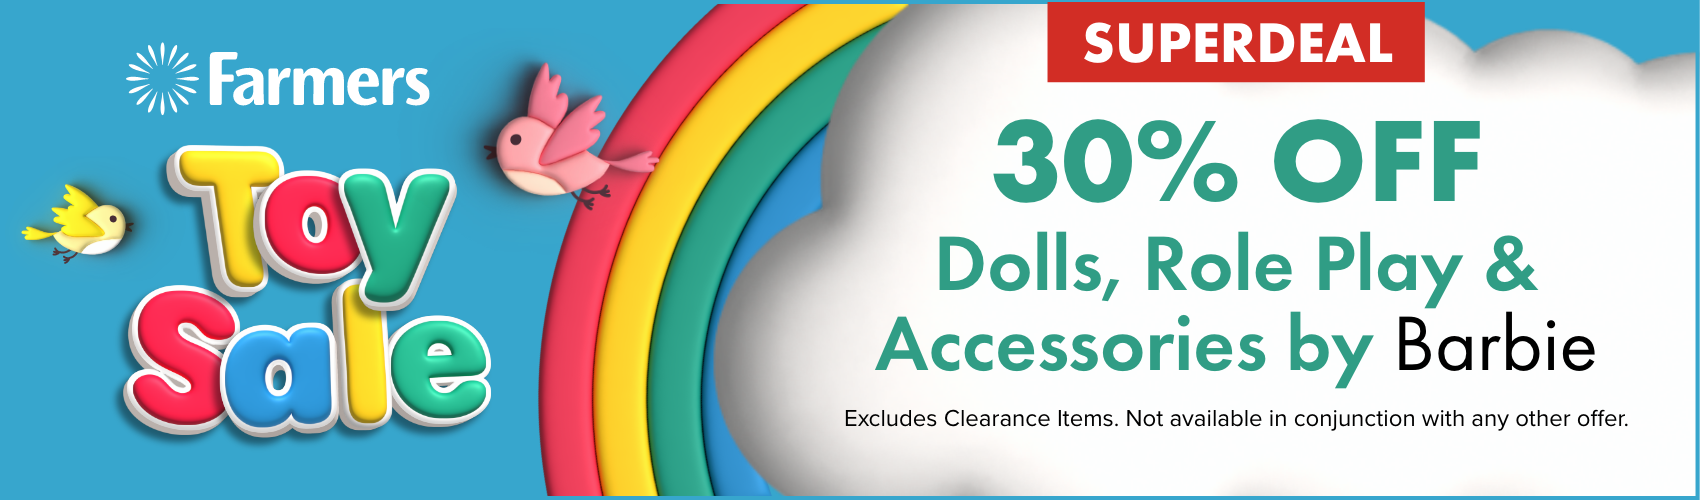 30% OFF Dolls, Role Play & Accessories by Barbie